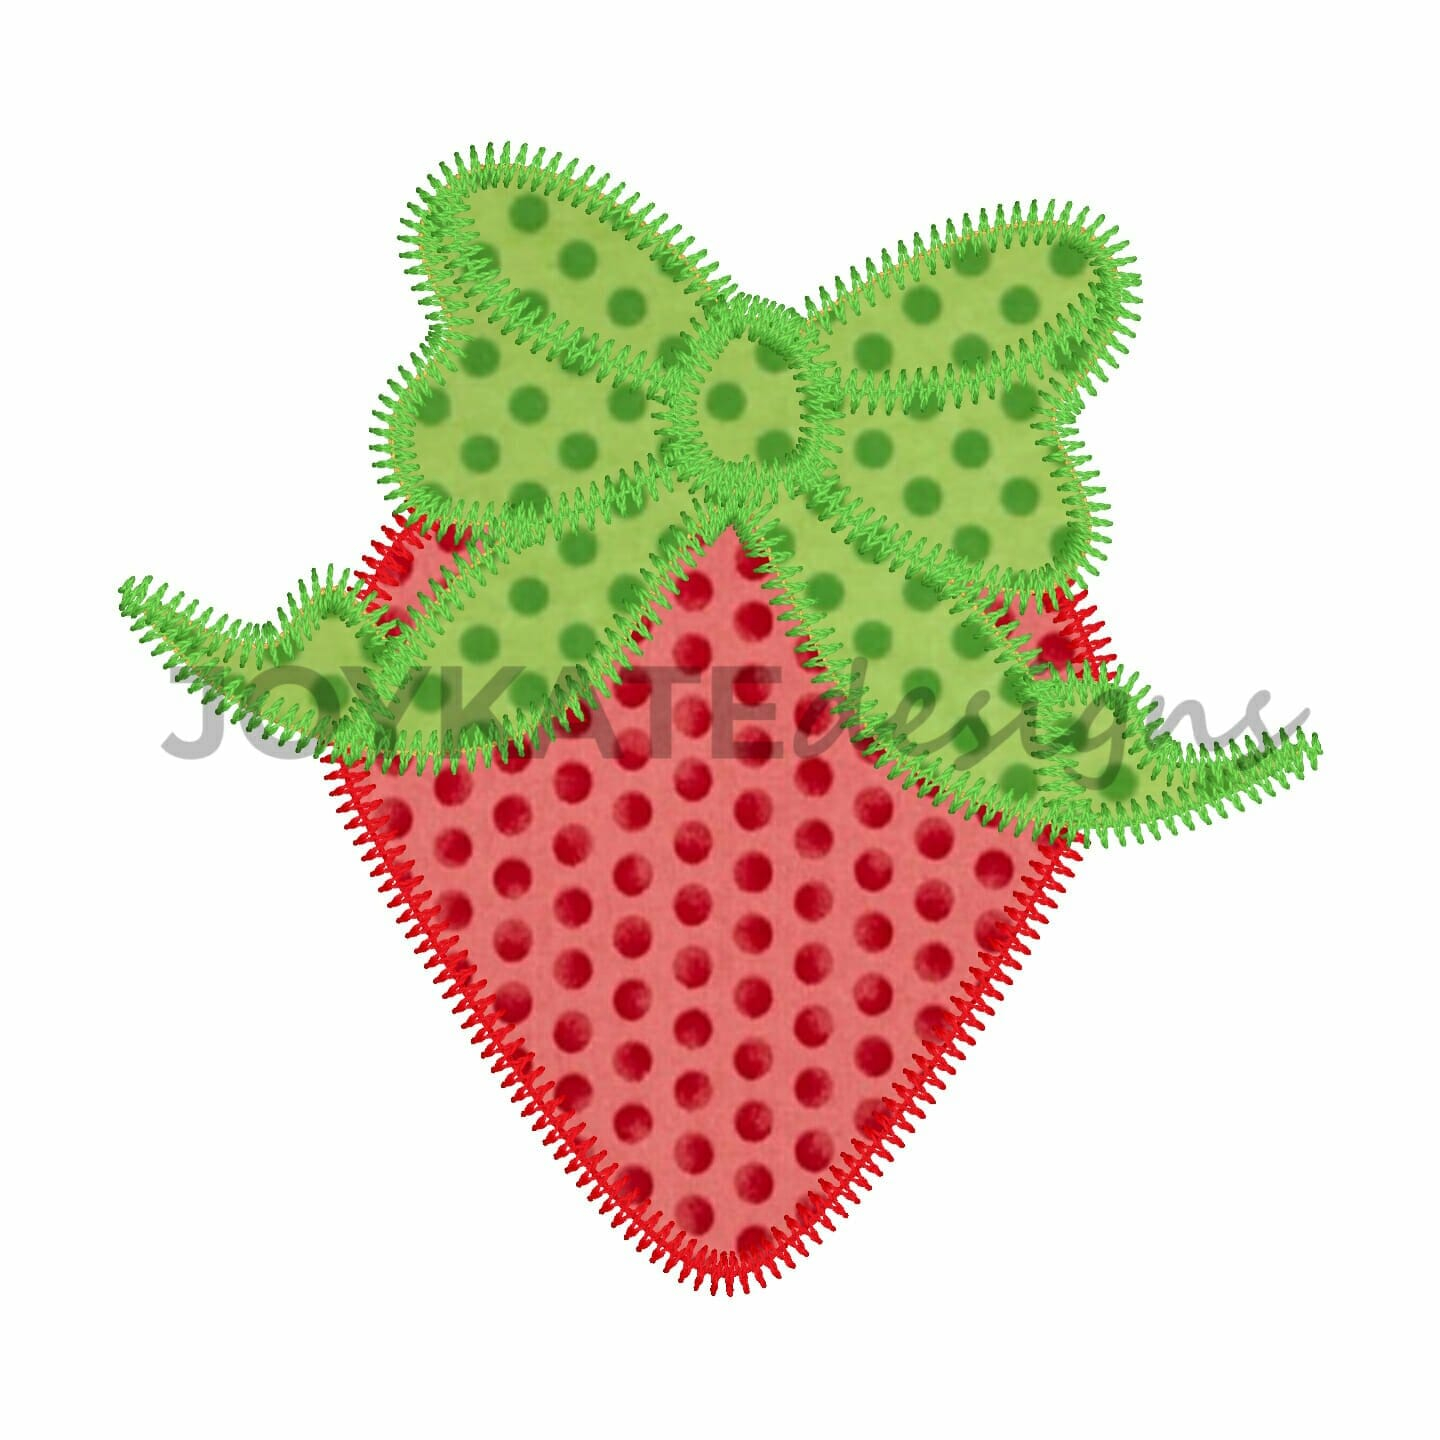 Strawberry Embroidery Pattern Strawberry With Bow Zigzag Applique Embroidery Design